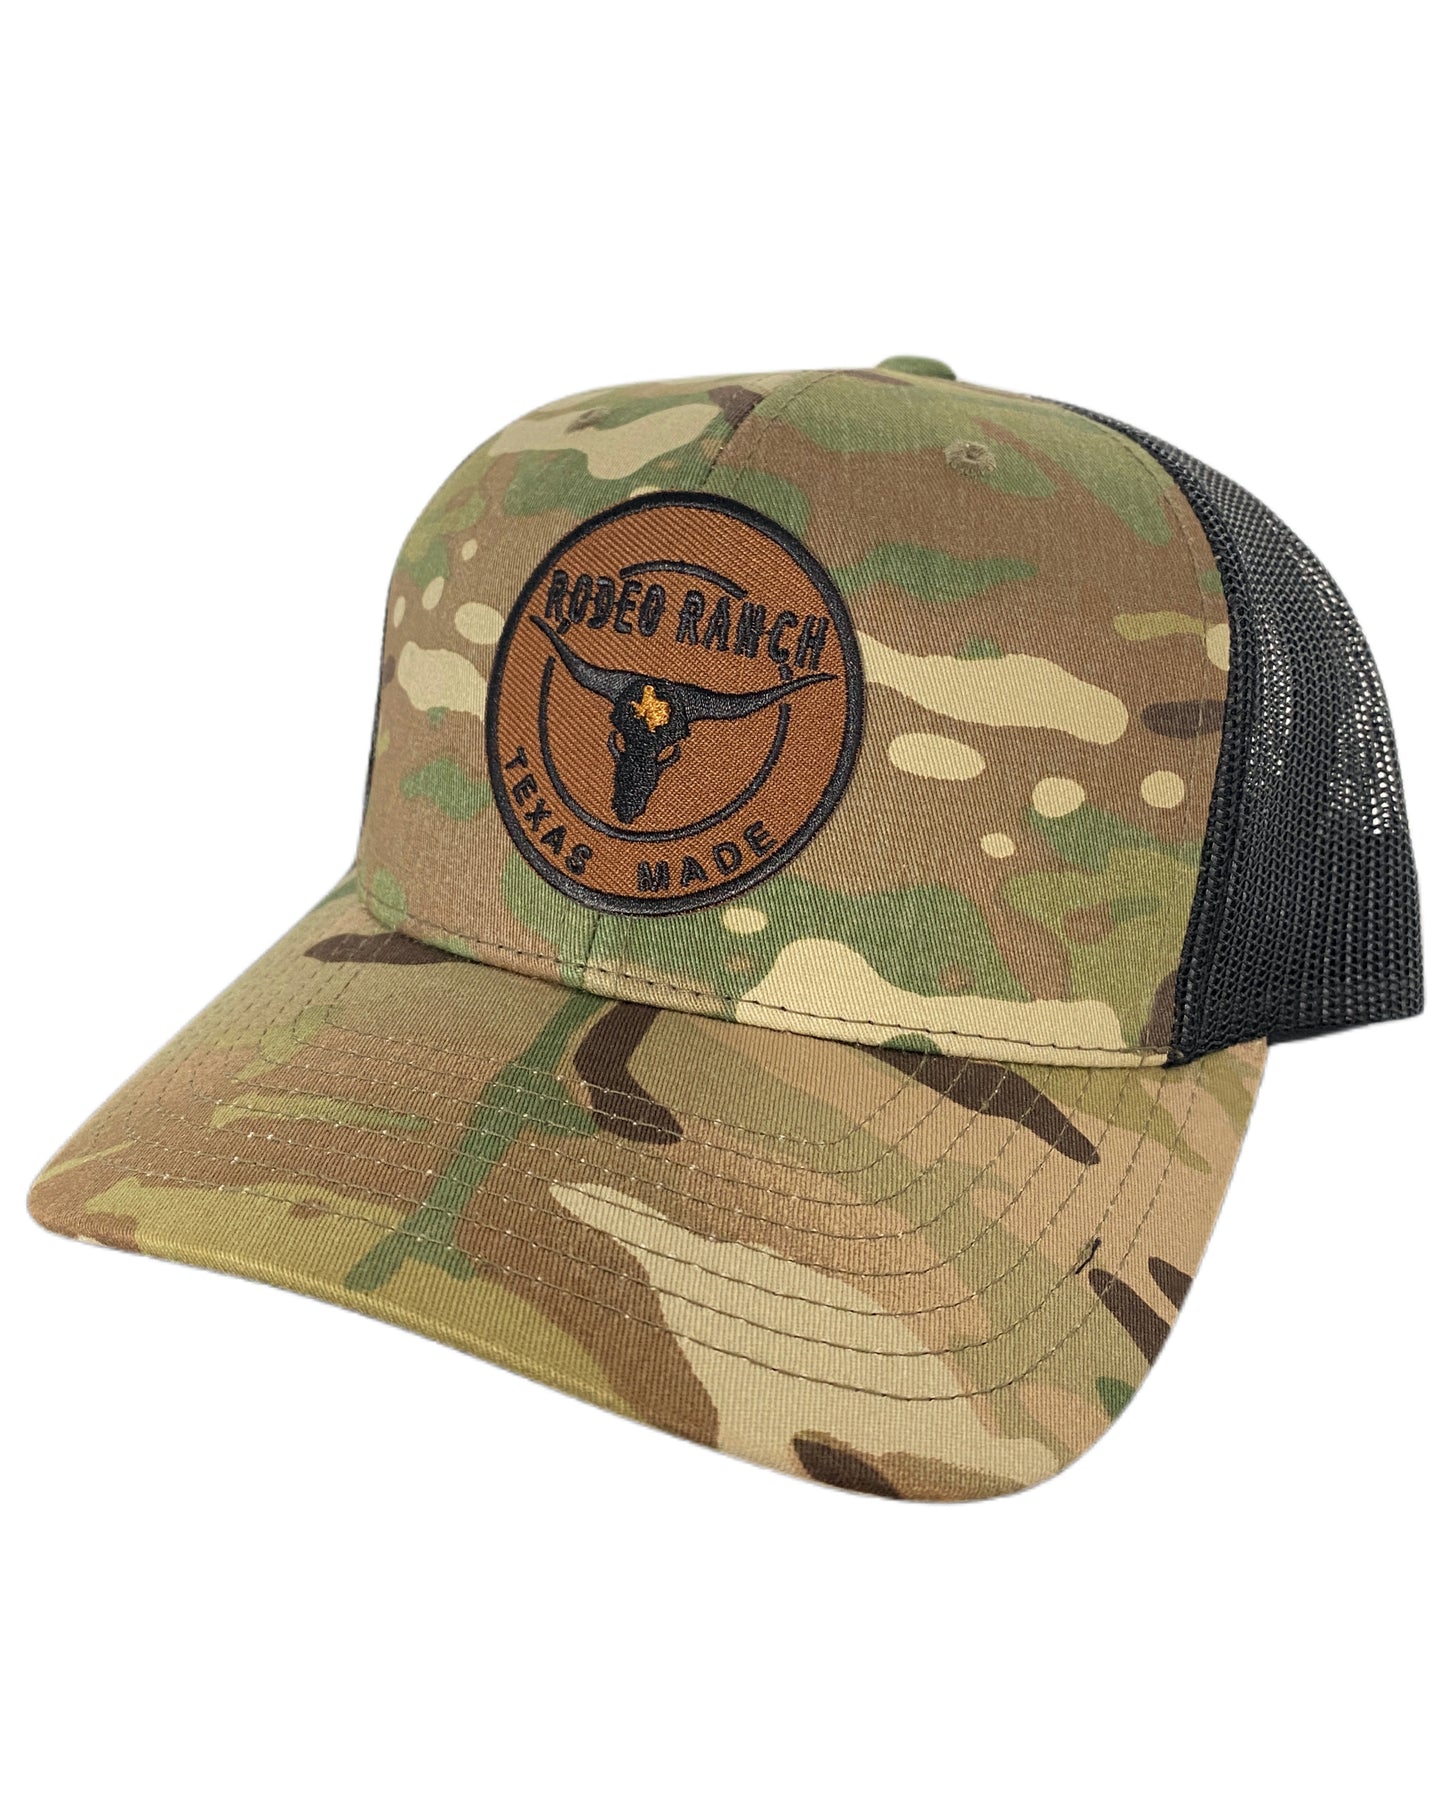 Rodeo Ranch Texas Made Hat - Camo and Black – Rodeo Ranch Wholesale